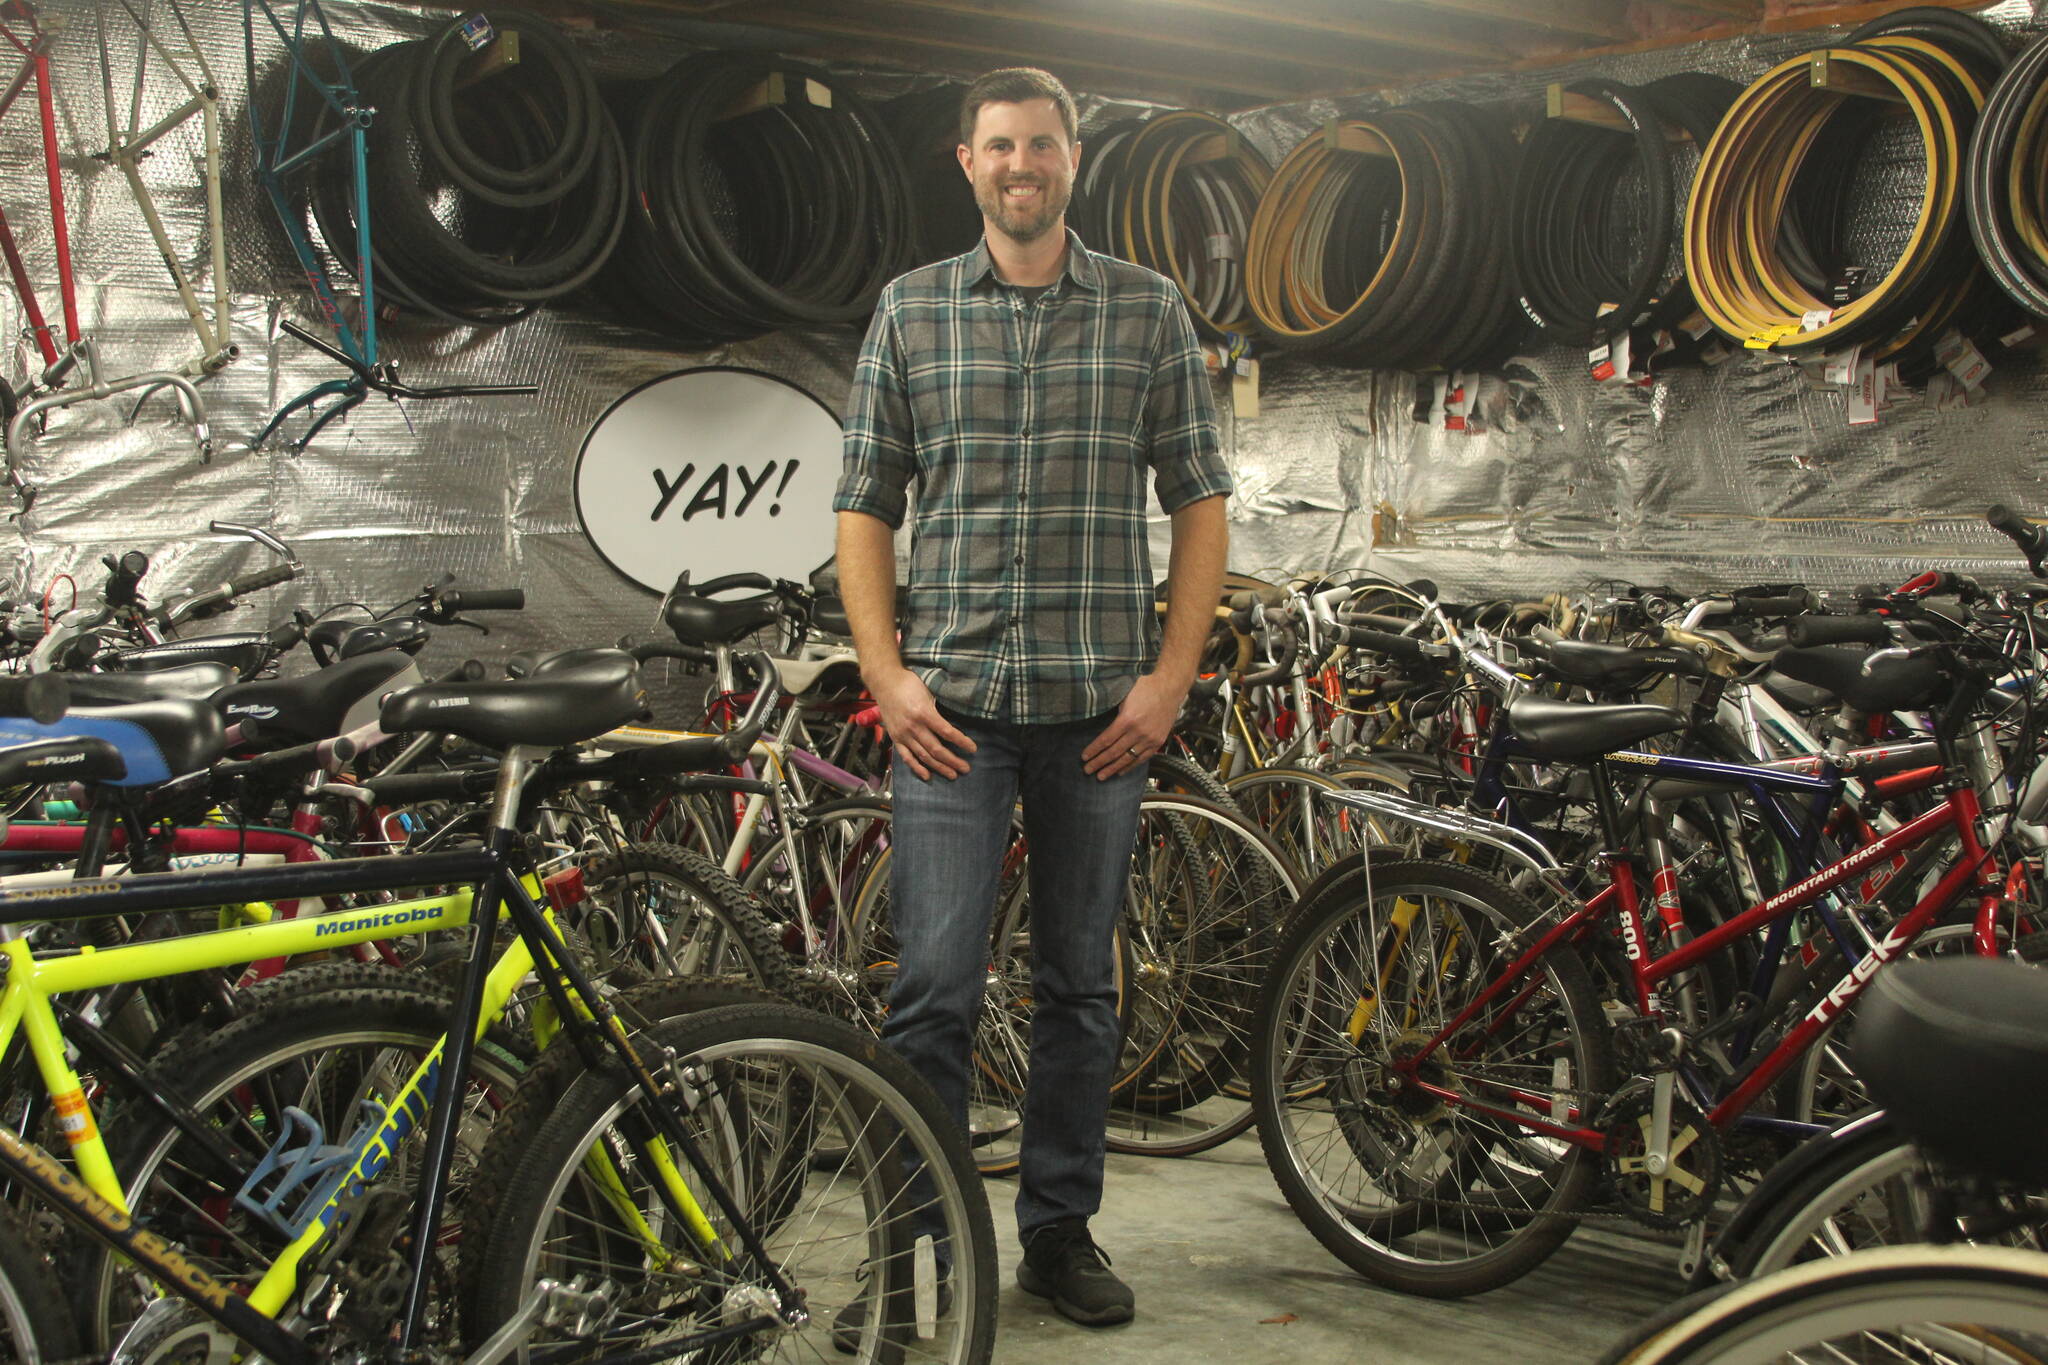 Photo by Karina Andrew/Whidbey News-Times
Trevor Stevens, owner and operator of Celerity Cycles, stands amid his inventory. These bicycles are available on Stevens’s website, and he works with customers to add the upgrades they want to the bikes they purchase.